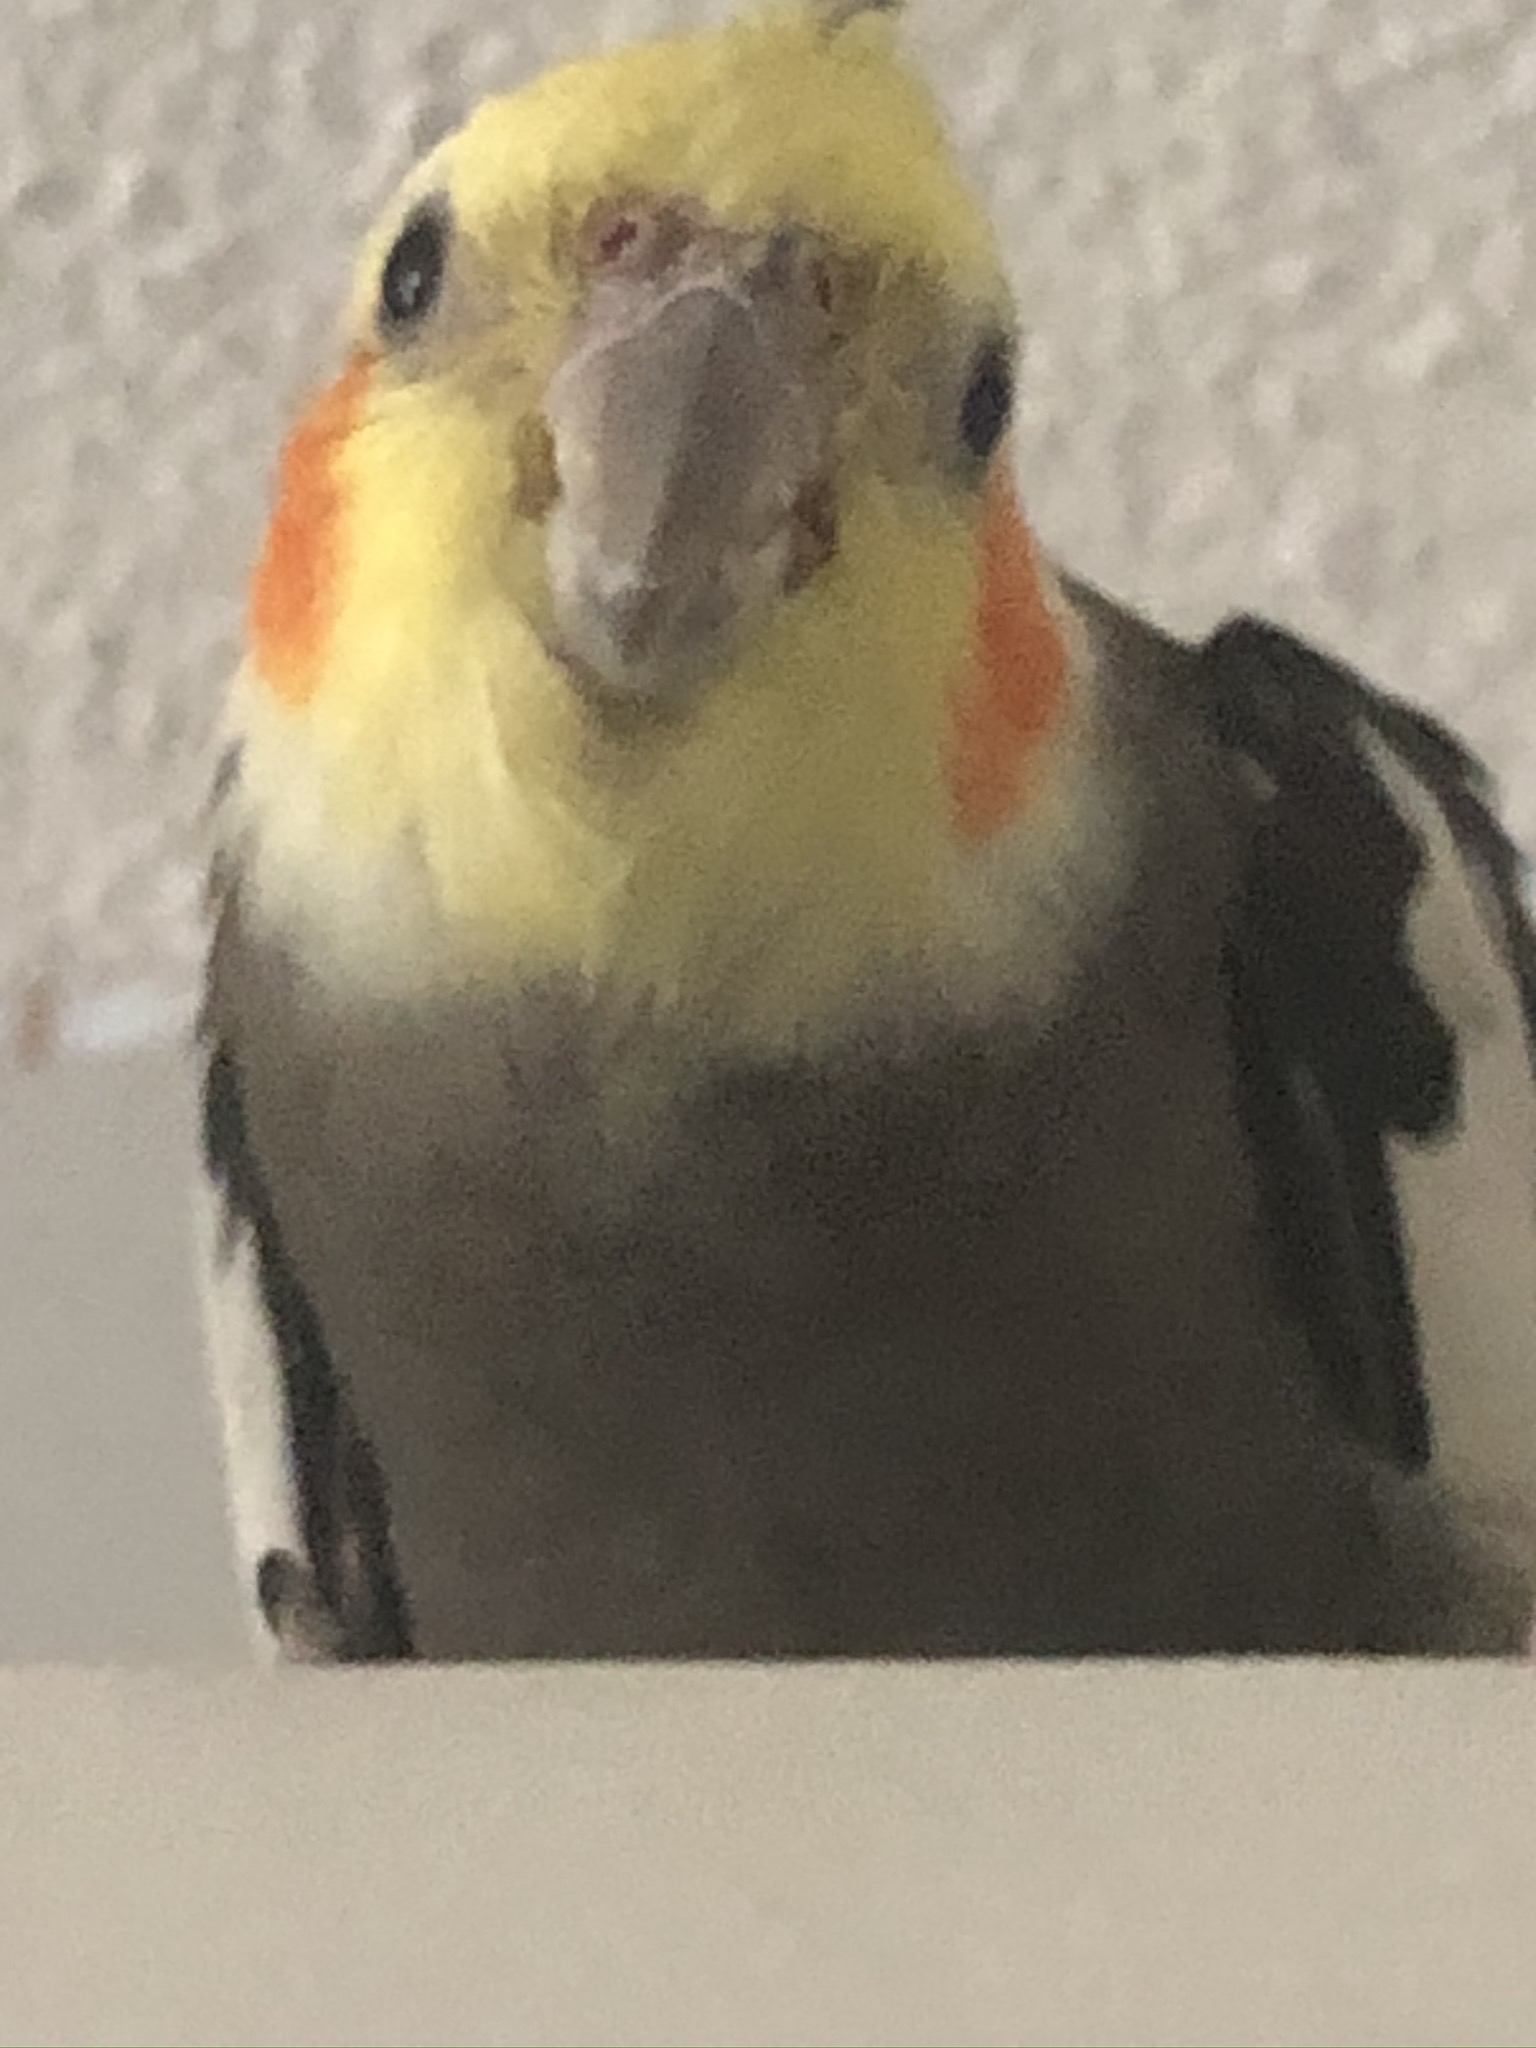 A normal grey cockatiel looking directly at the camera. He looks like he is posing and smiling.